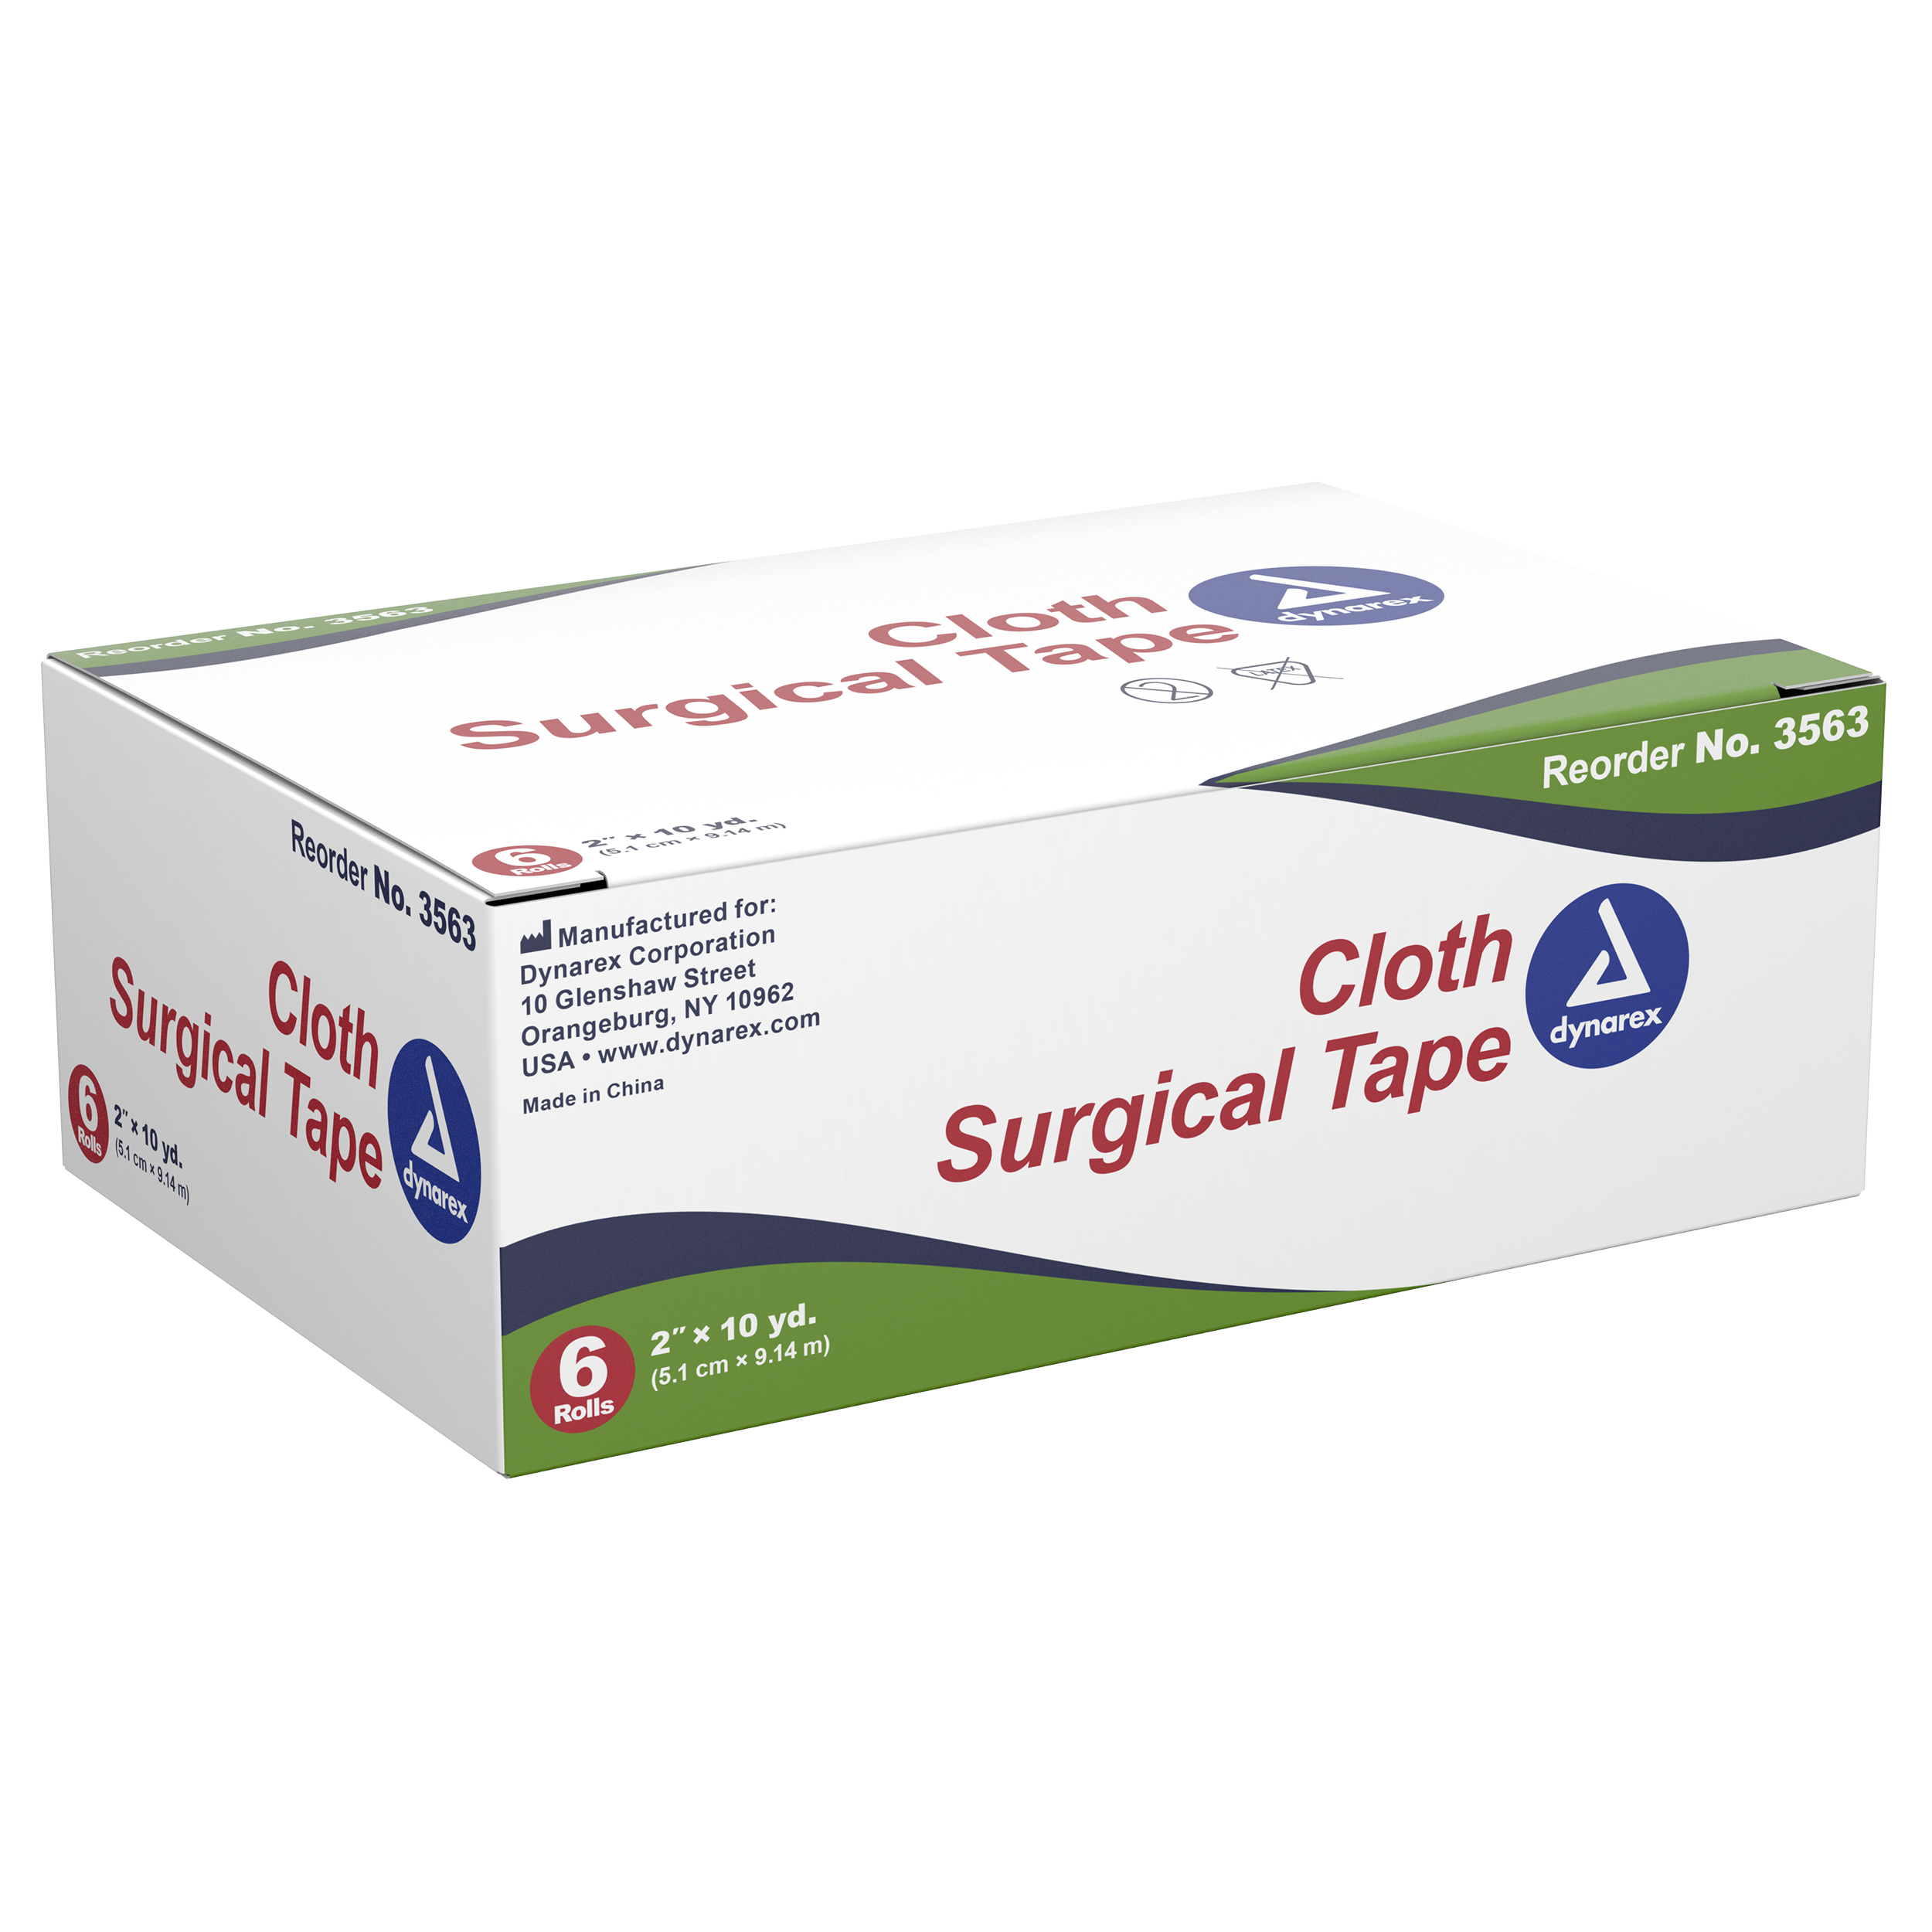 Cloth Surgical Tape - 2